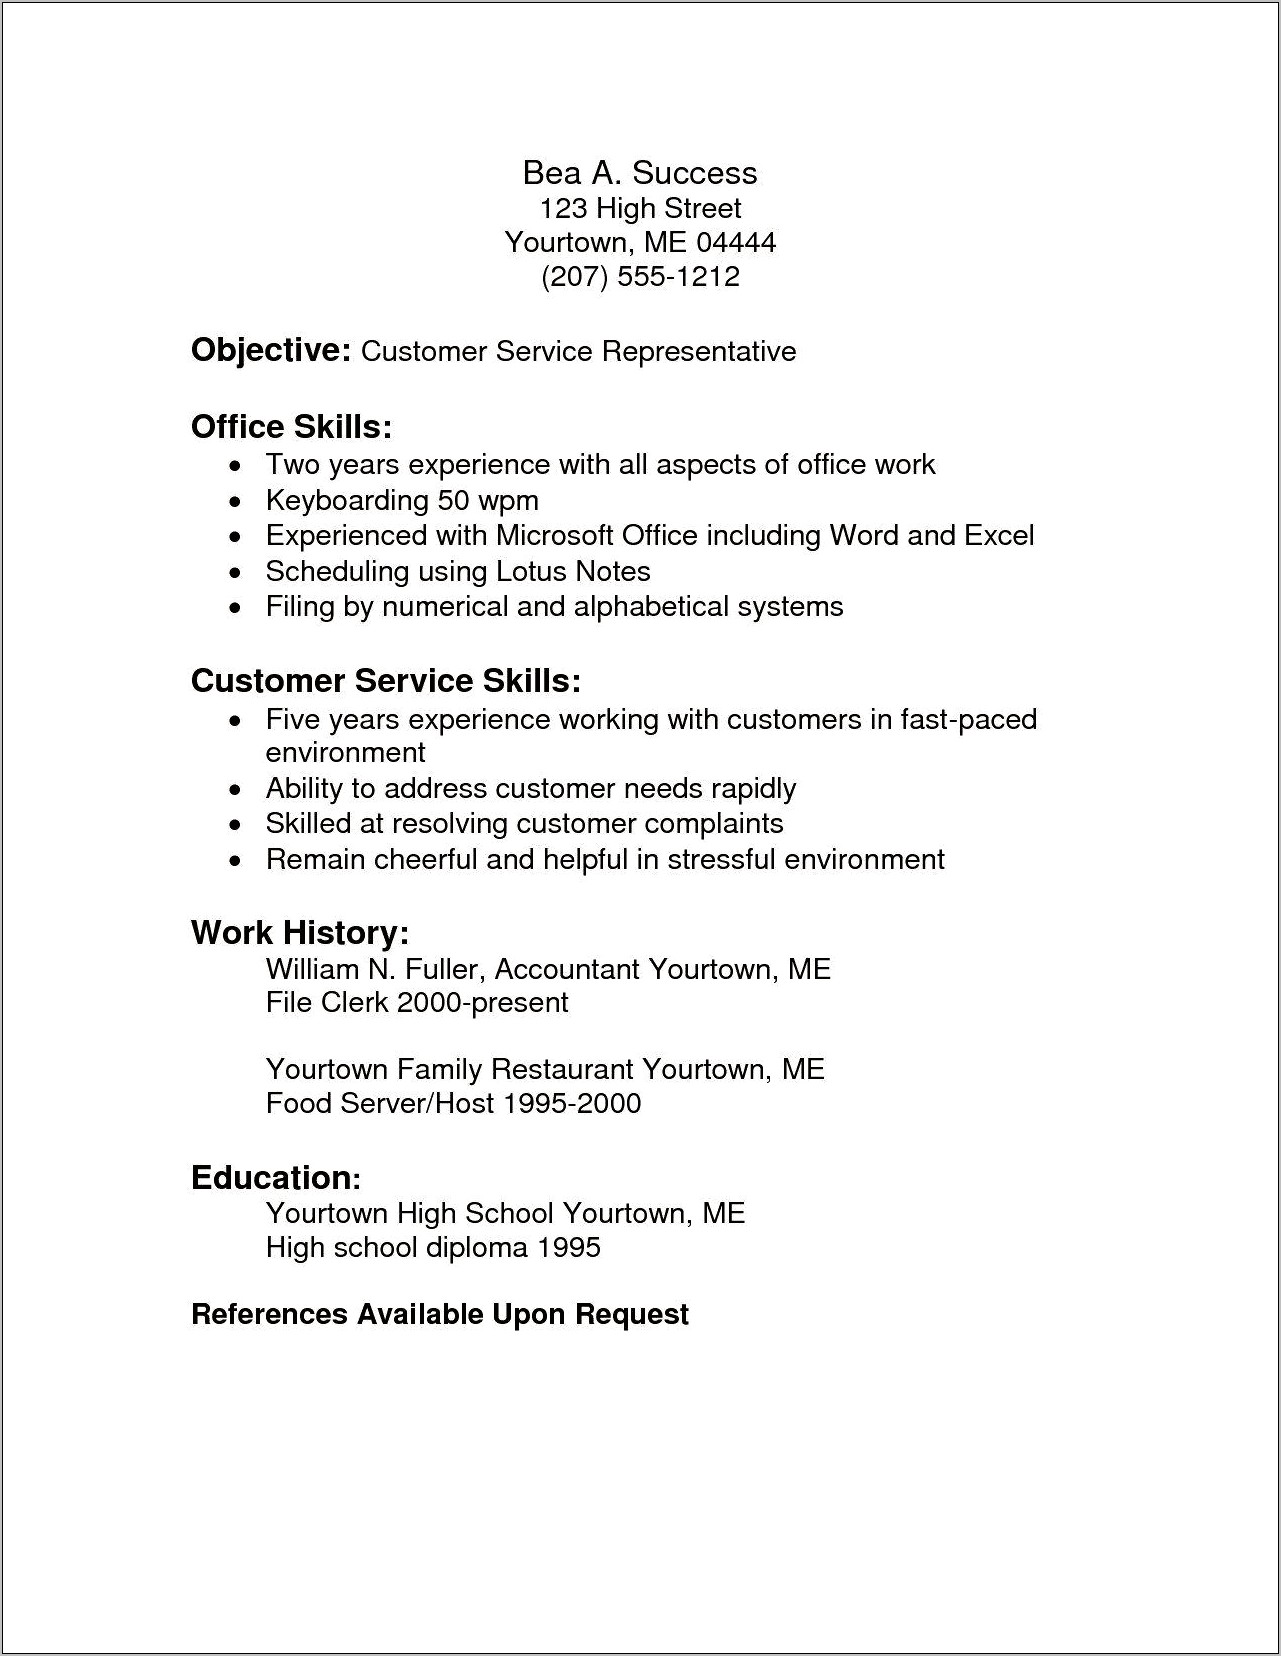 Objective Section In Resume For Office Representative